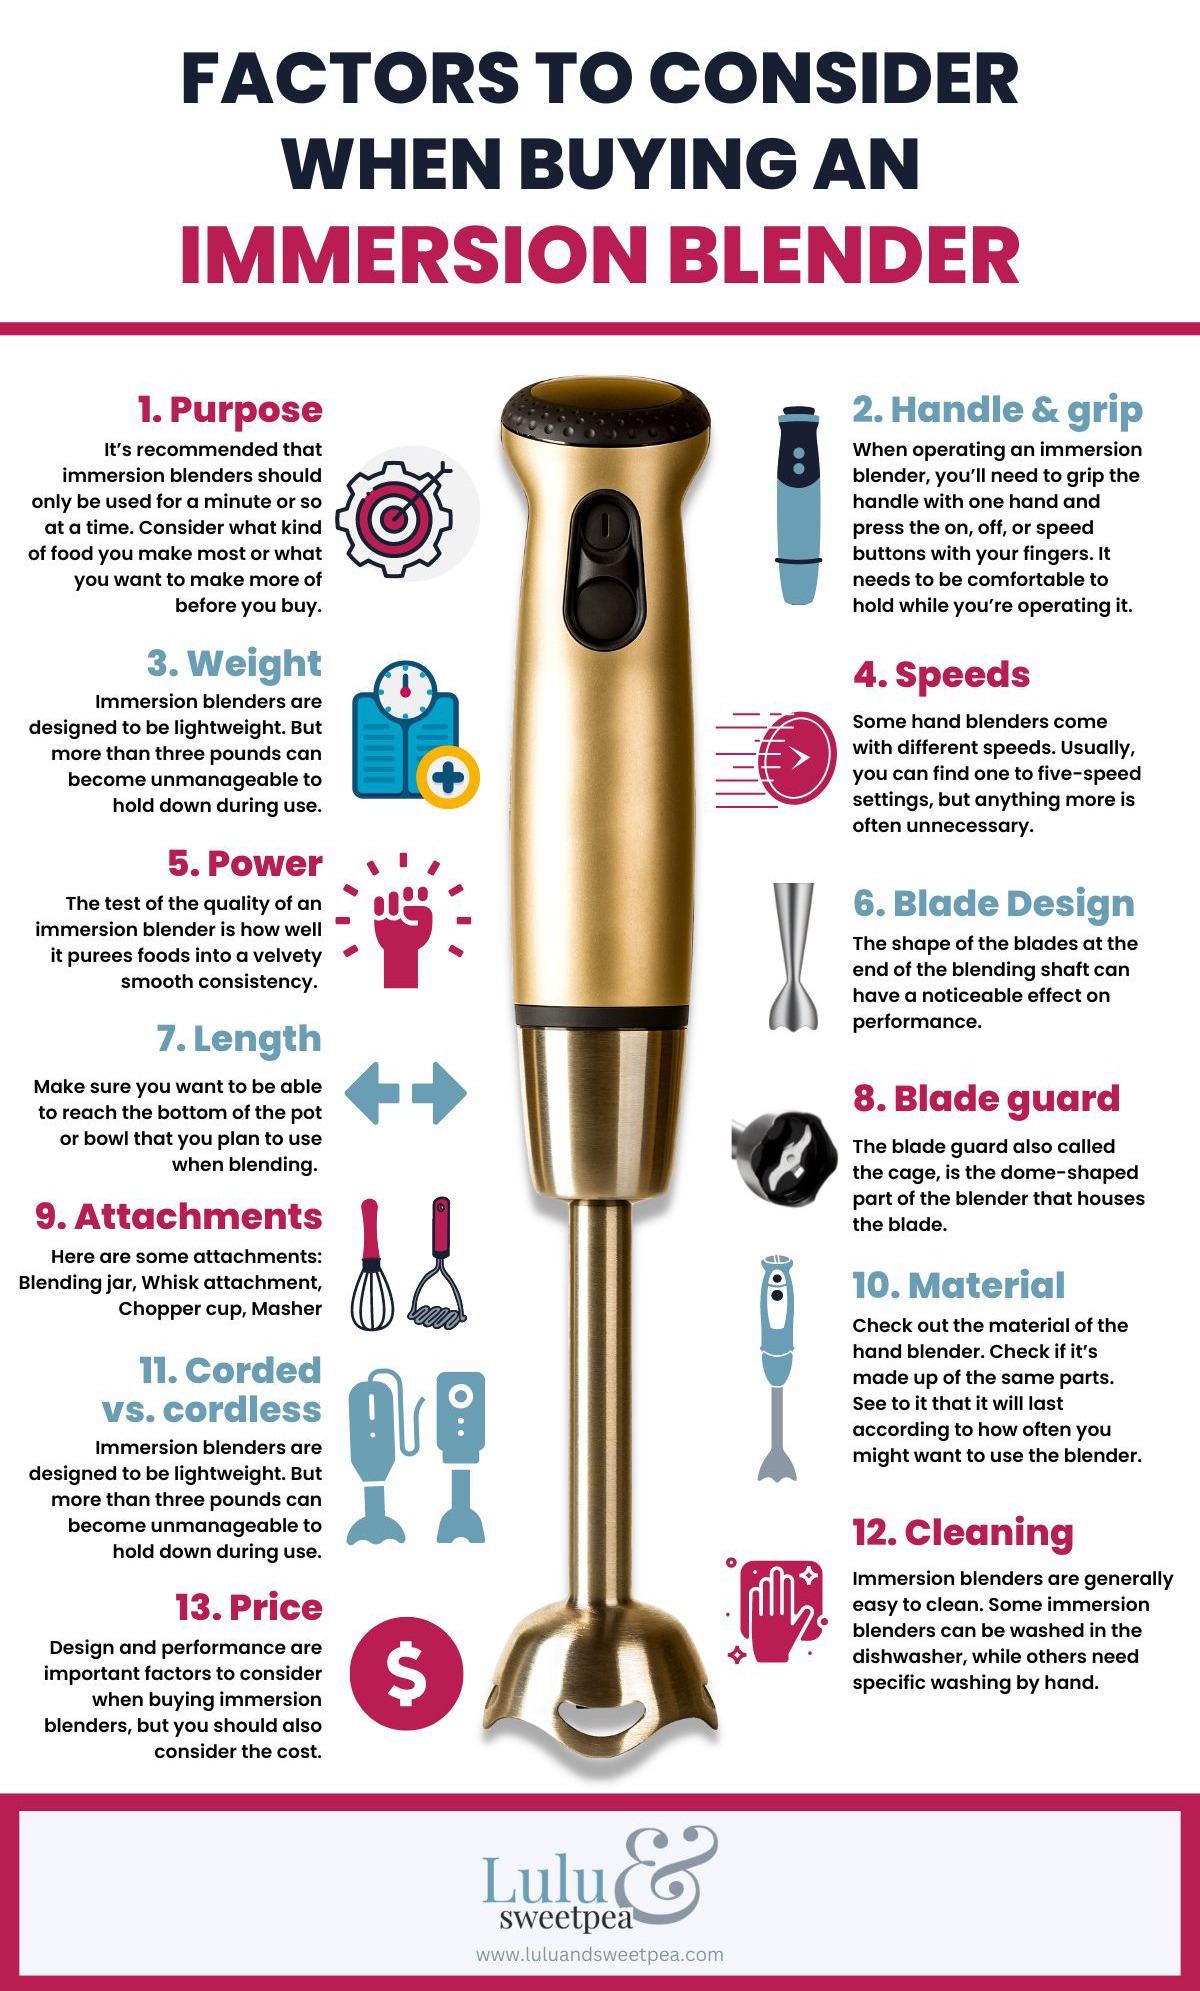 Things to Consider Before Buying an Immersion Blender